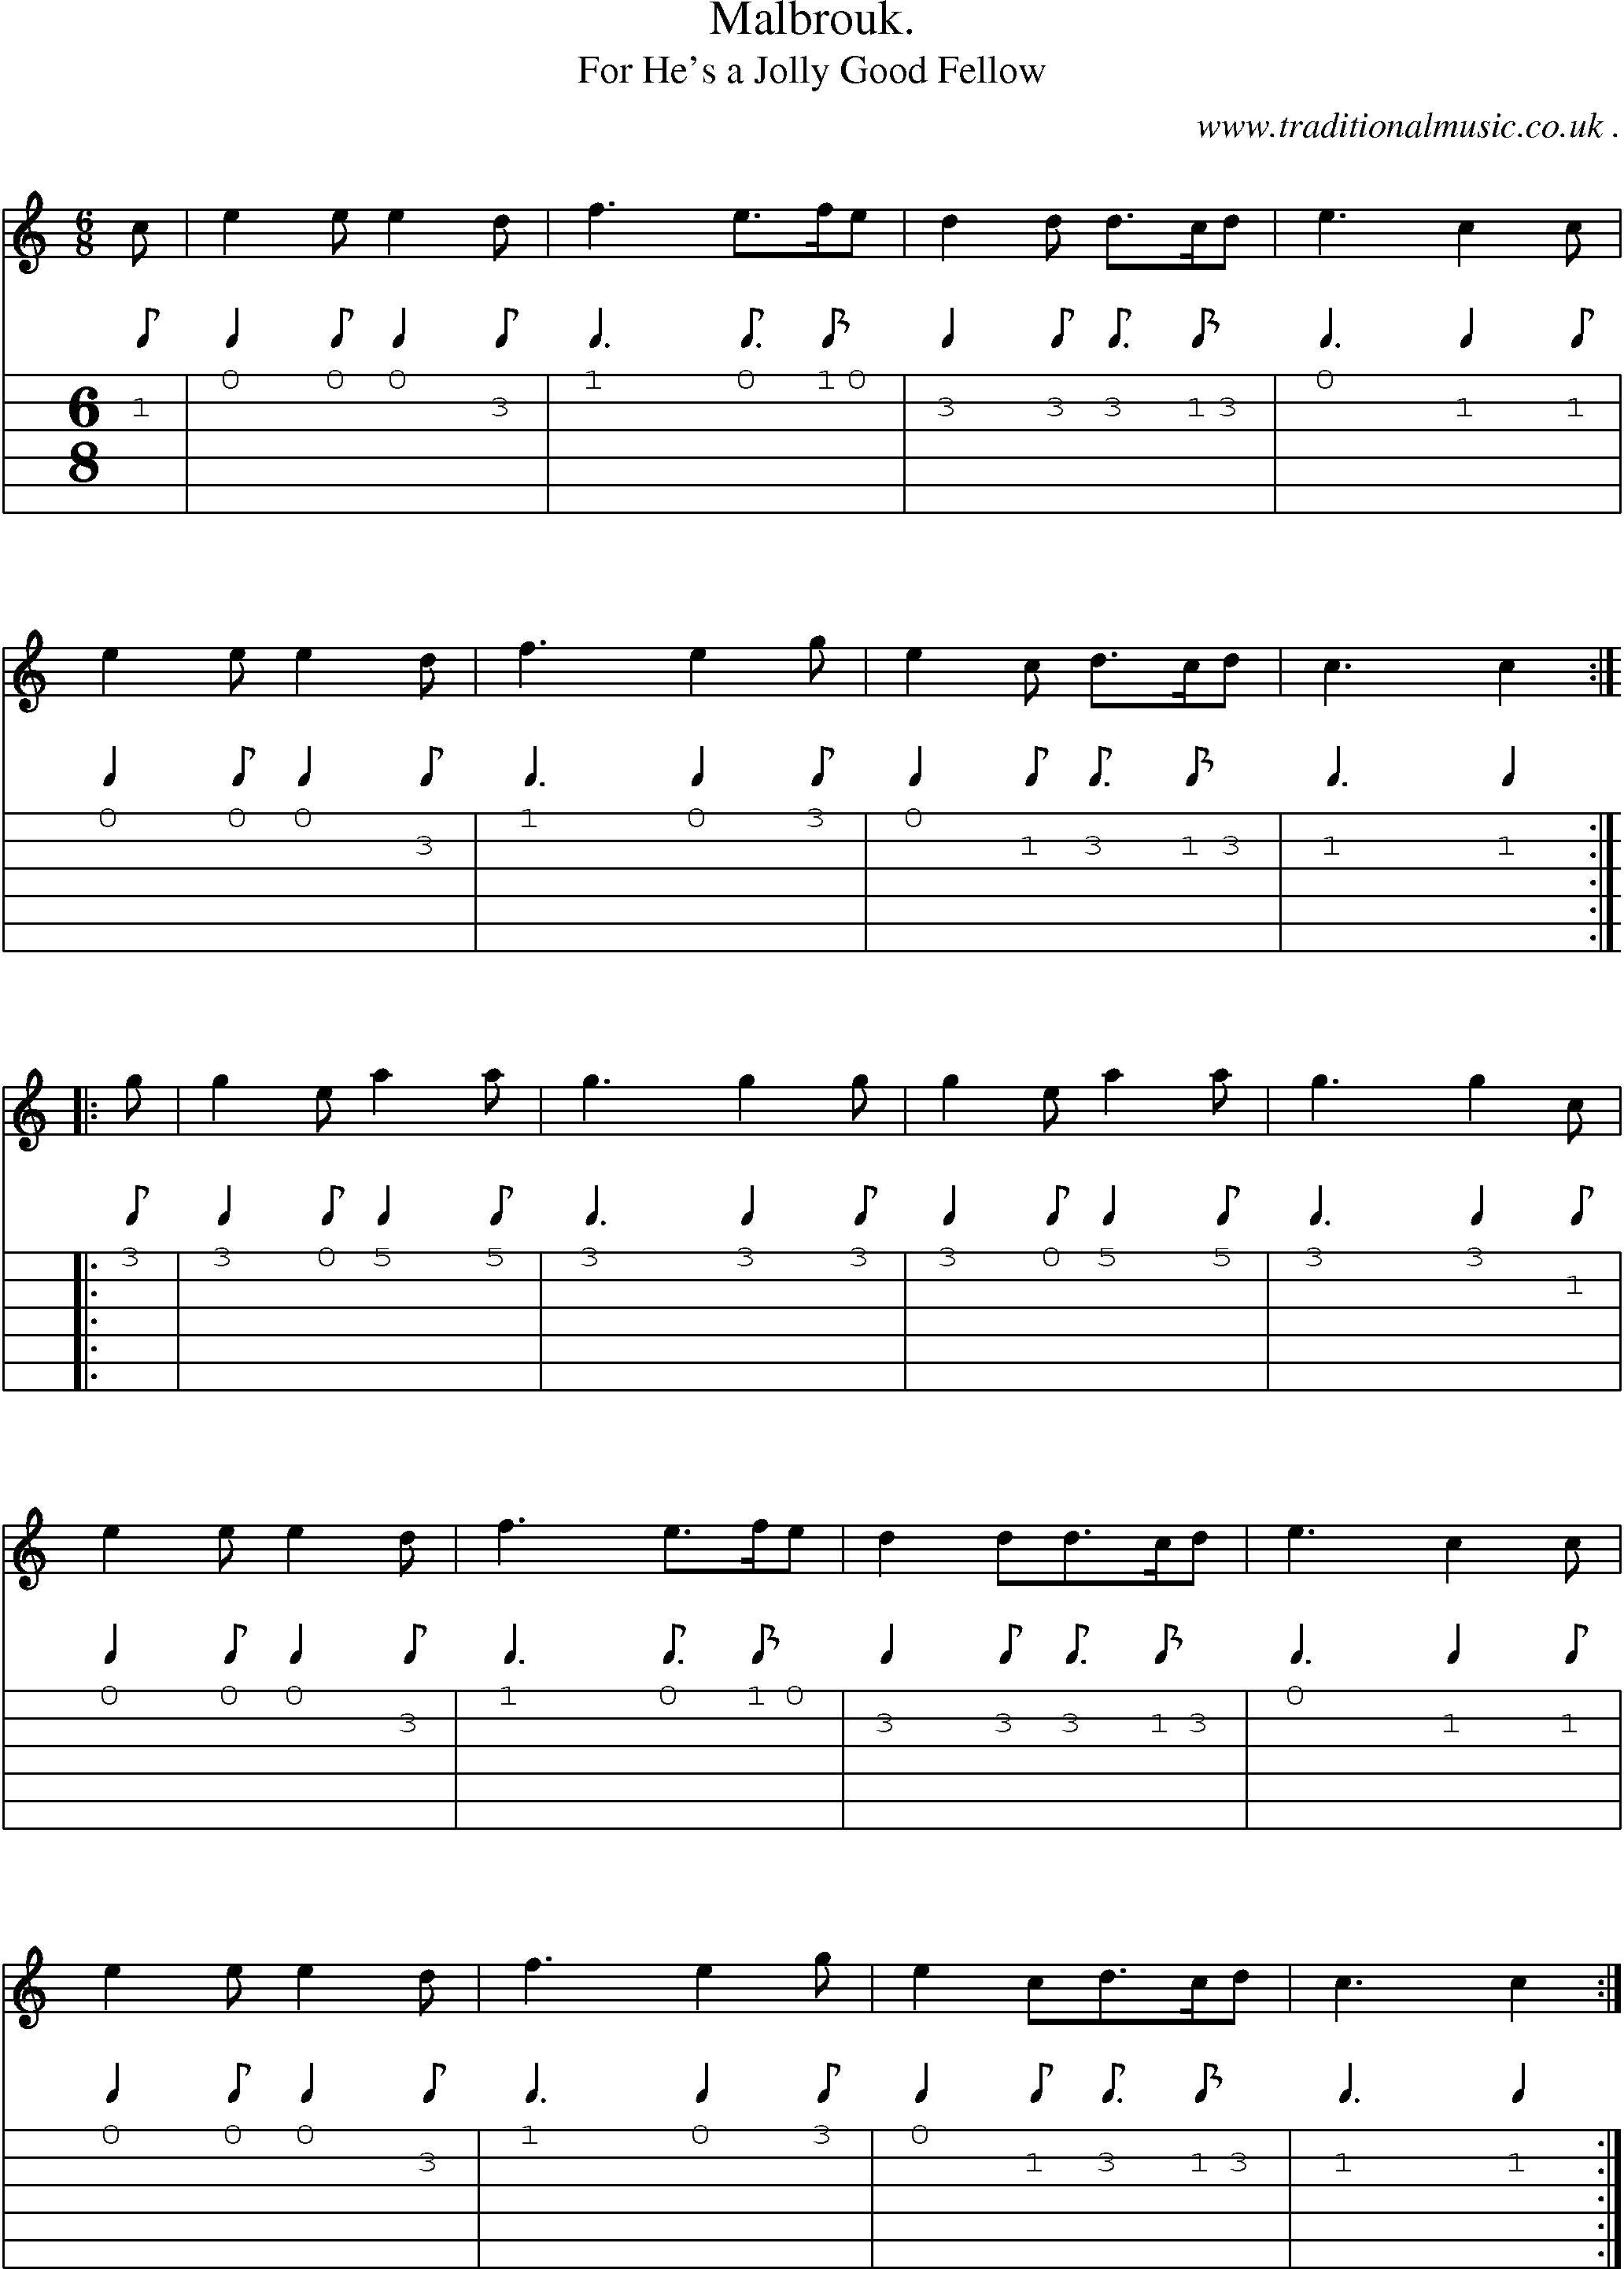 Sheet-Music and Guitar Tabs for Malbrouk